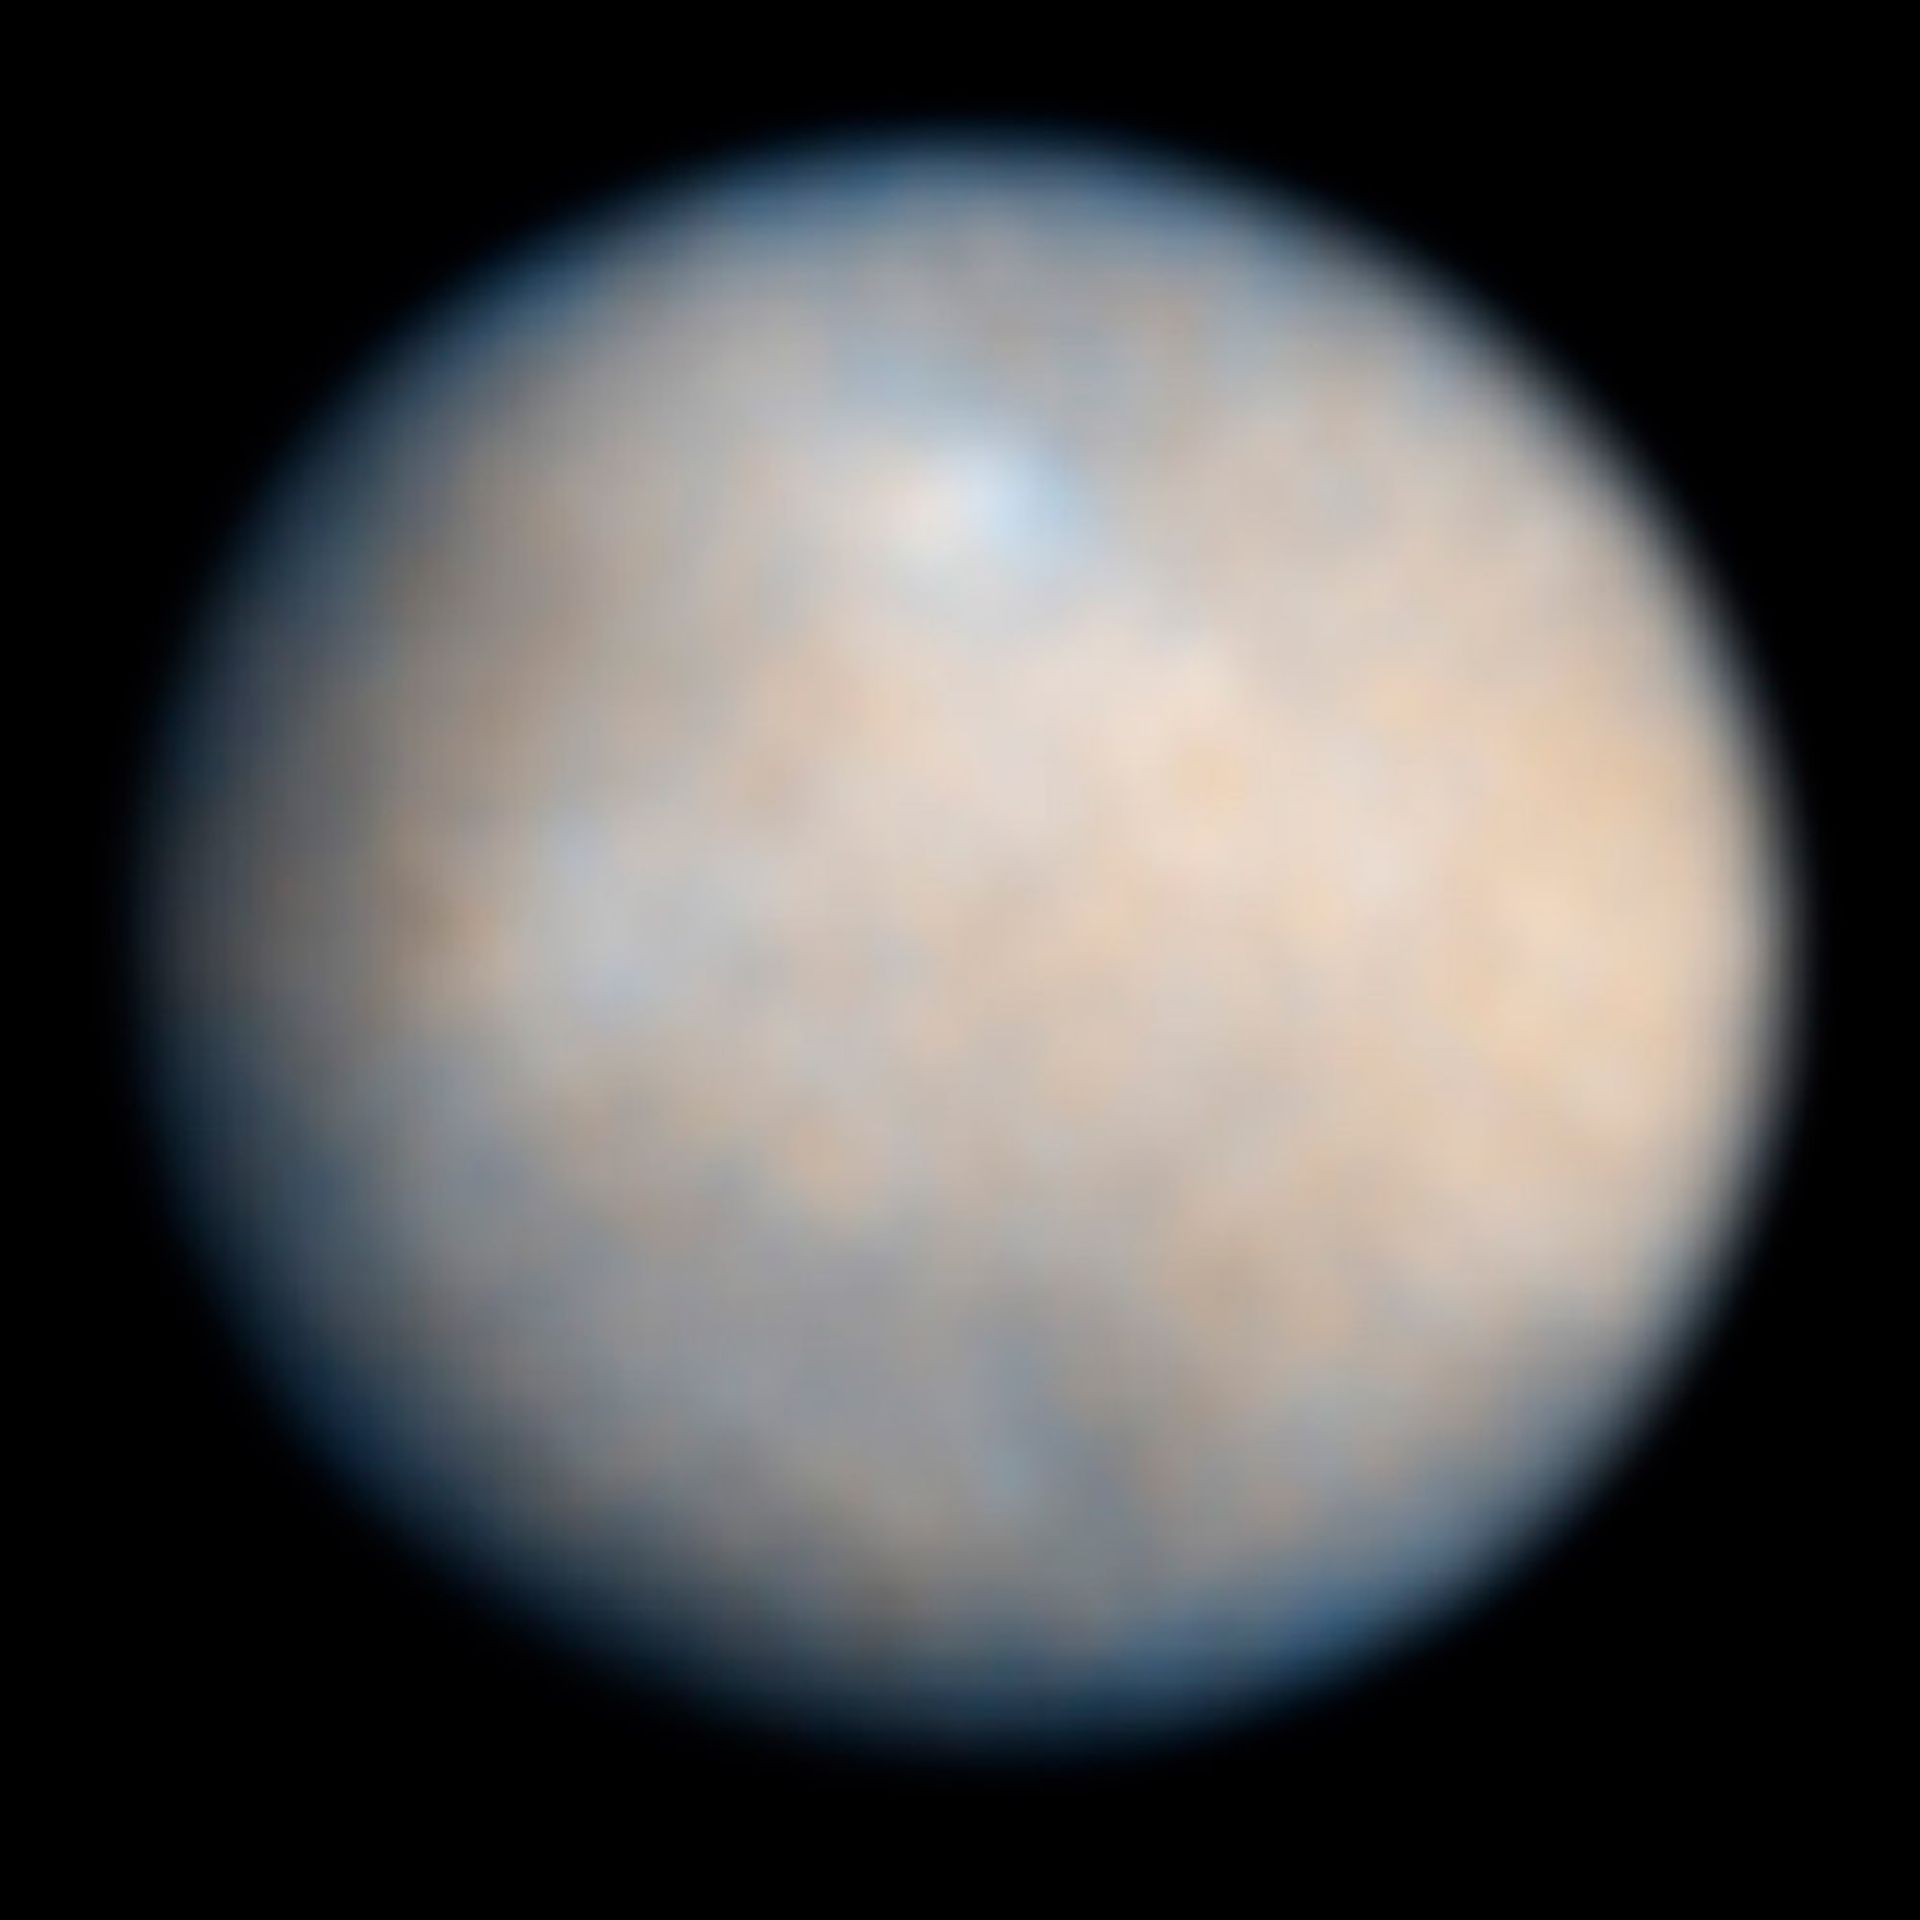 Hubble image of Ceres